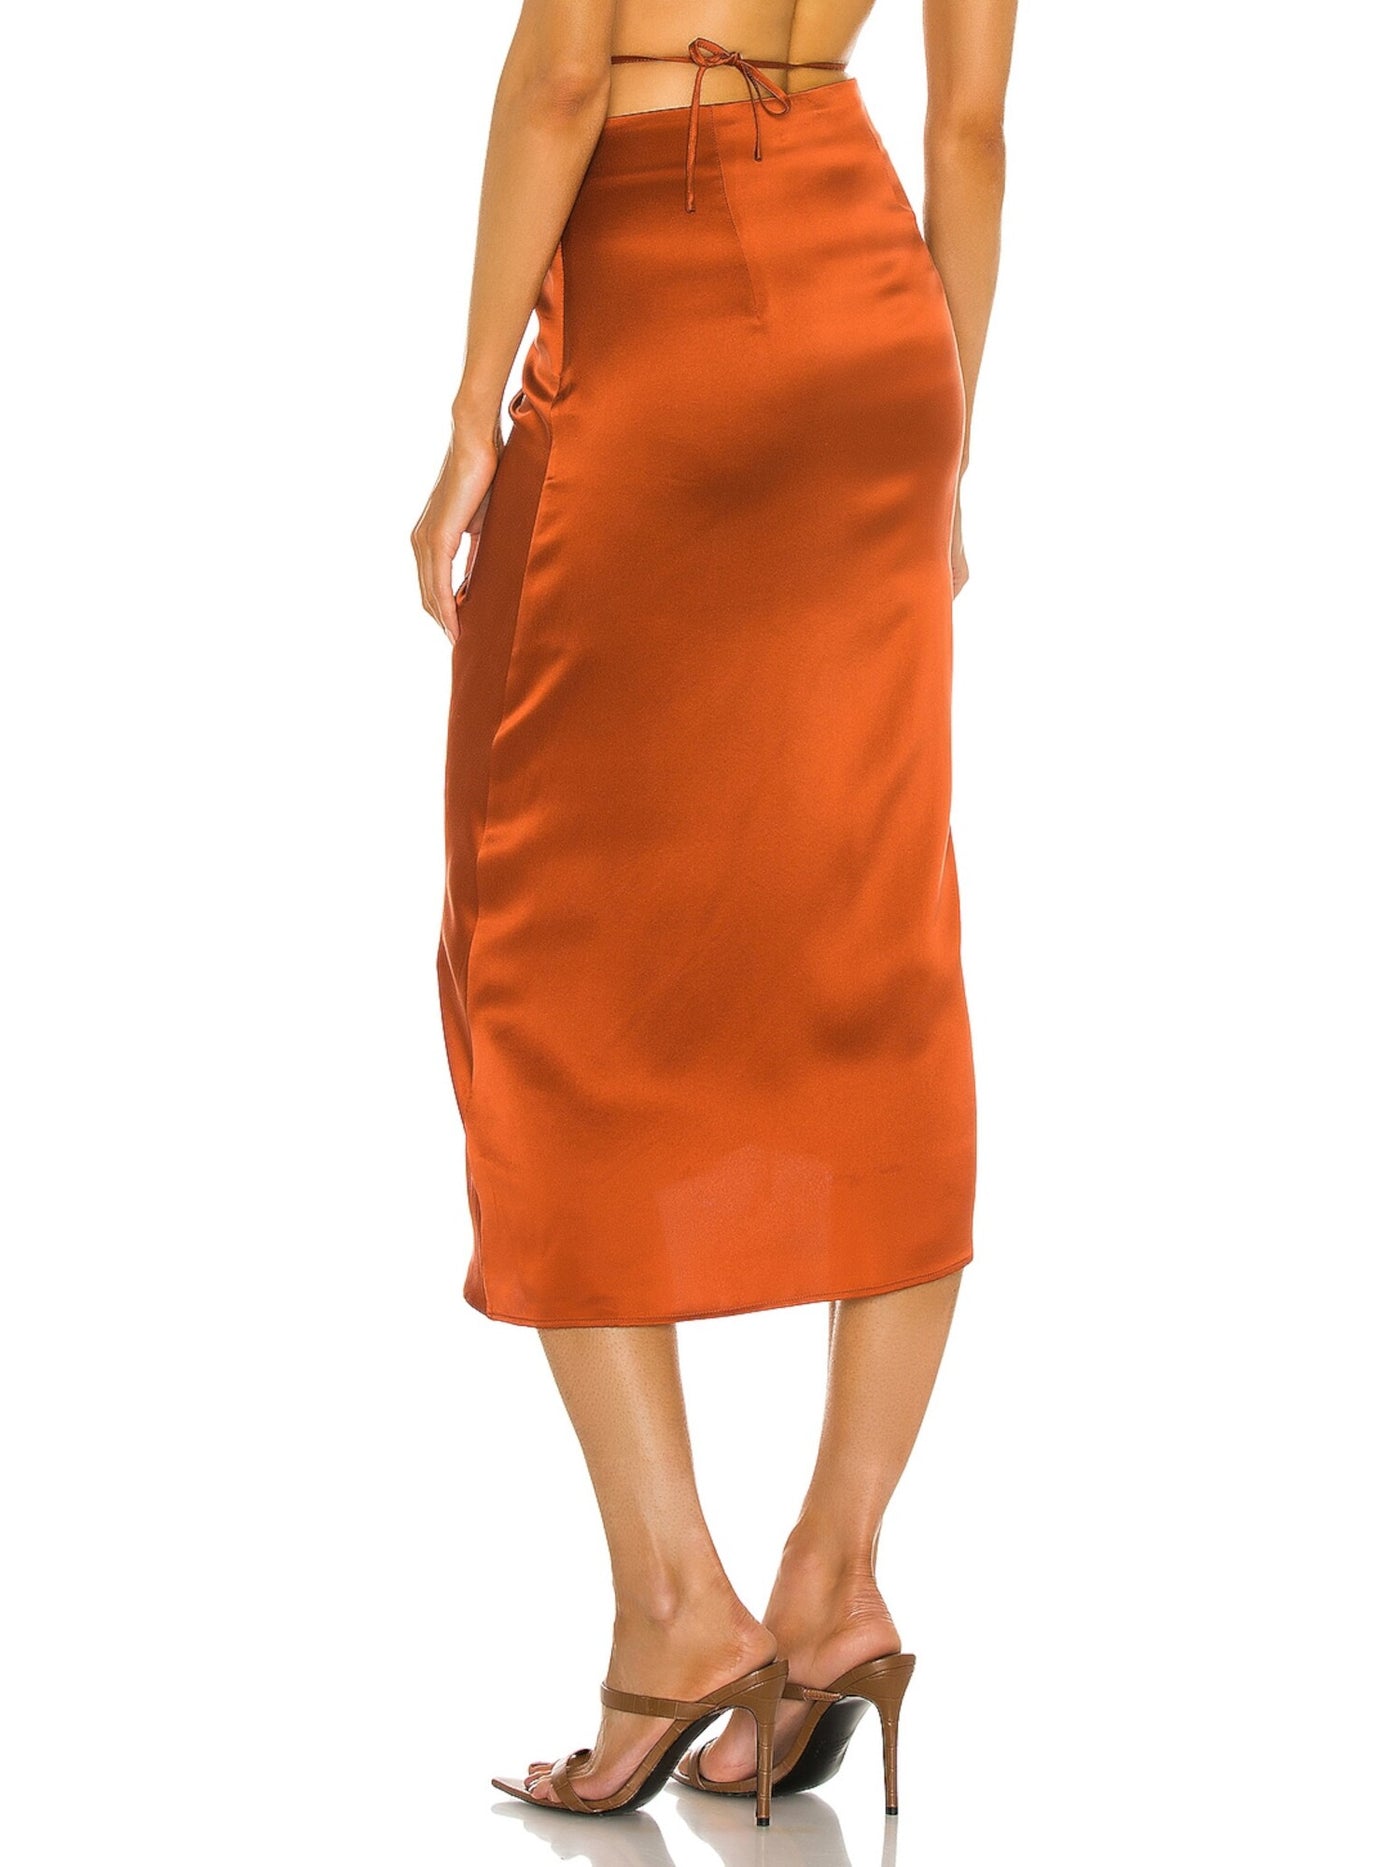 NICHOLAS Womens Zippered Tie Adjustable Ruched Front Midi Party Pencil Skirt